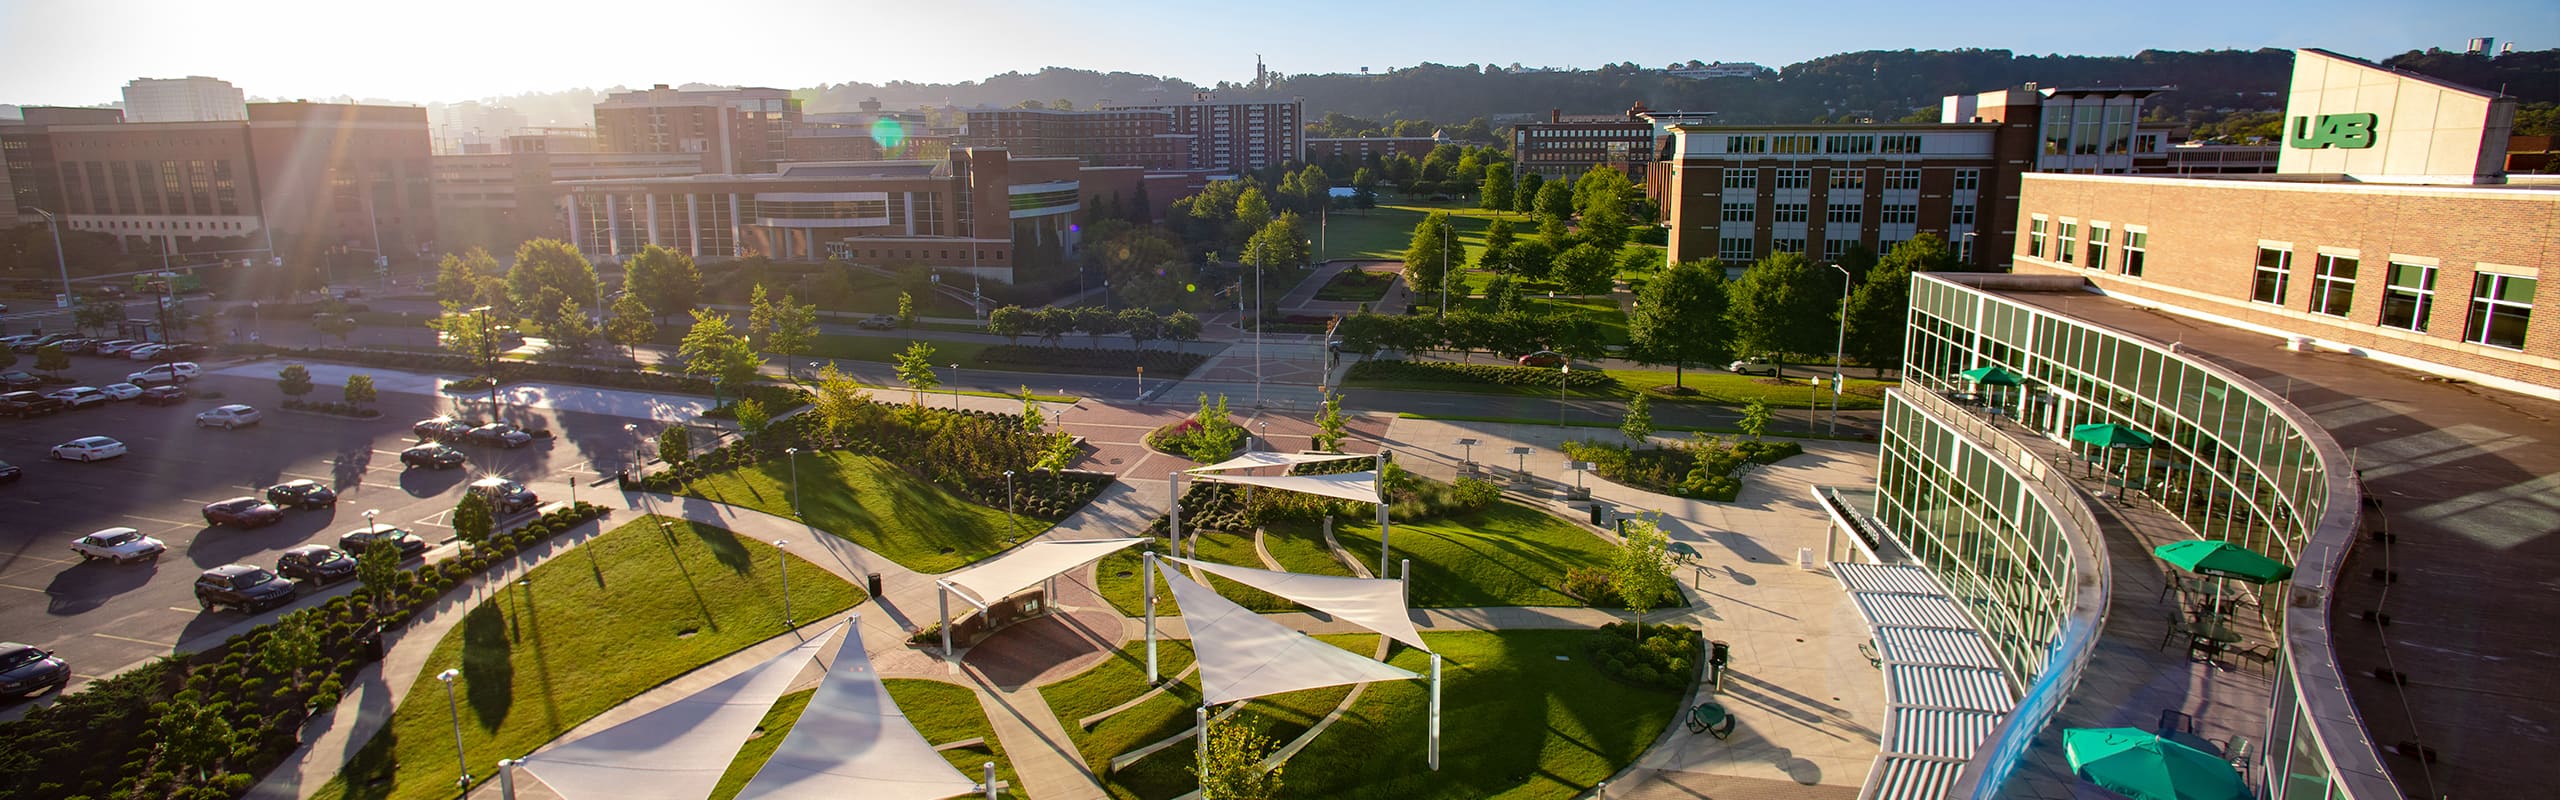 Drone style shot in front of the UAB Hill Student Center showing the amphitheater and the campus green.